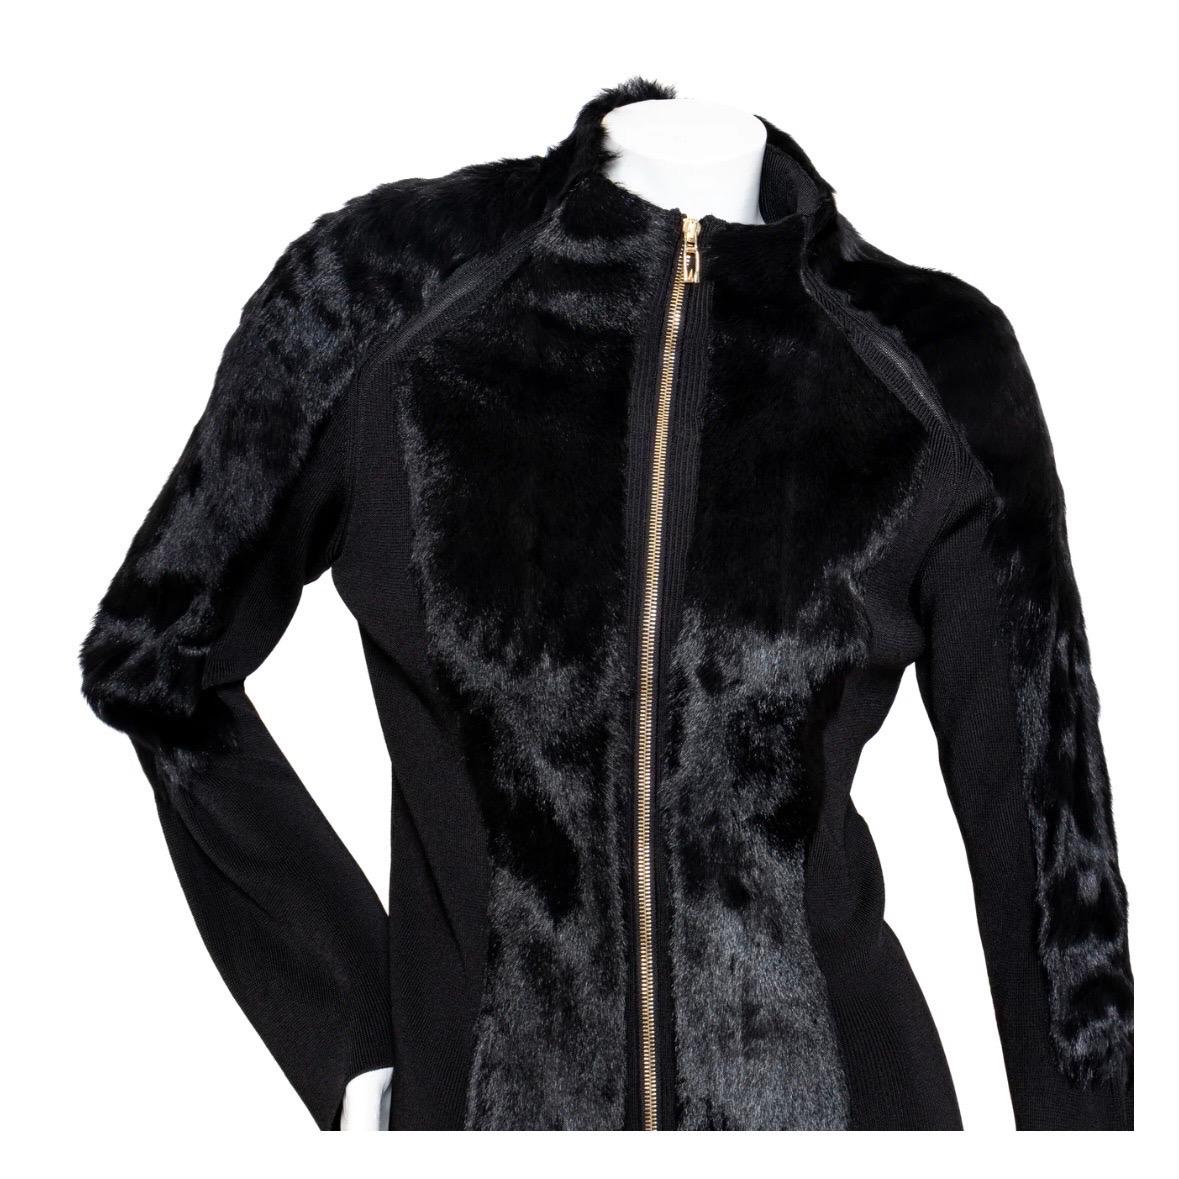 Knit and Fur Zippered Cardigan by Tom Ford for Gucci
Circa 1999
Solid Black
Long sleeves
High neck
Knit with fur trim on front, shoulders, and arms 
Bell cuffs 
Silver-tone front zipper closure with dual 